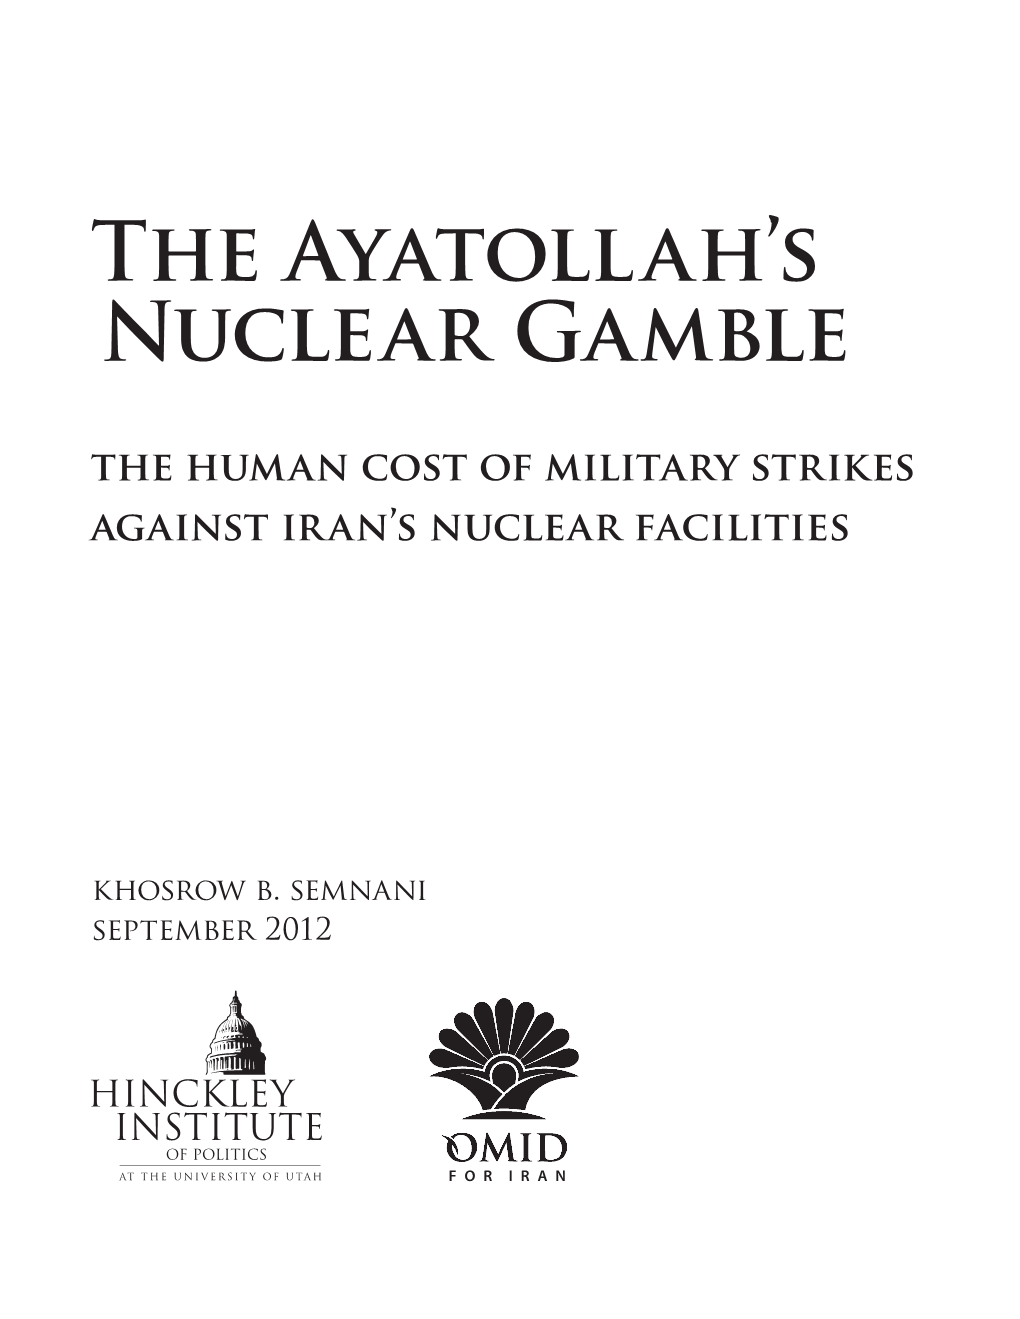 The Ayatollah's Nuclear Gamble: the Human Cost of Military Strikes Against Iran's Nuclear Facilities